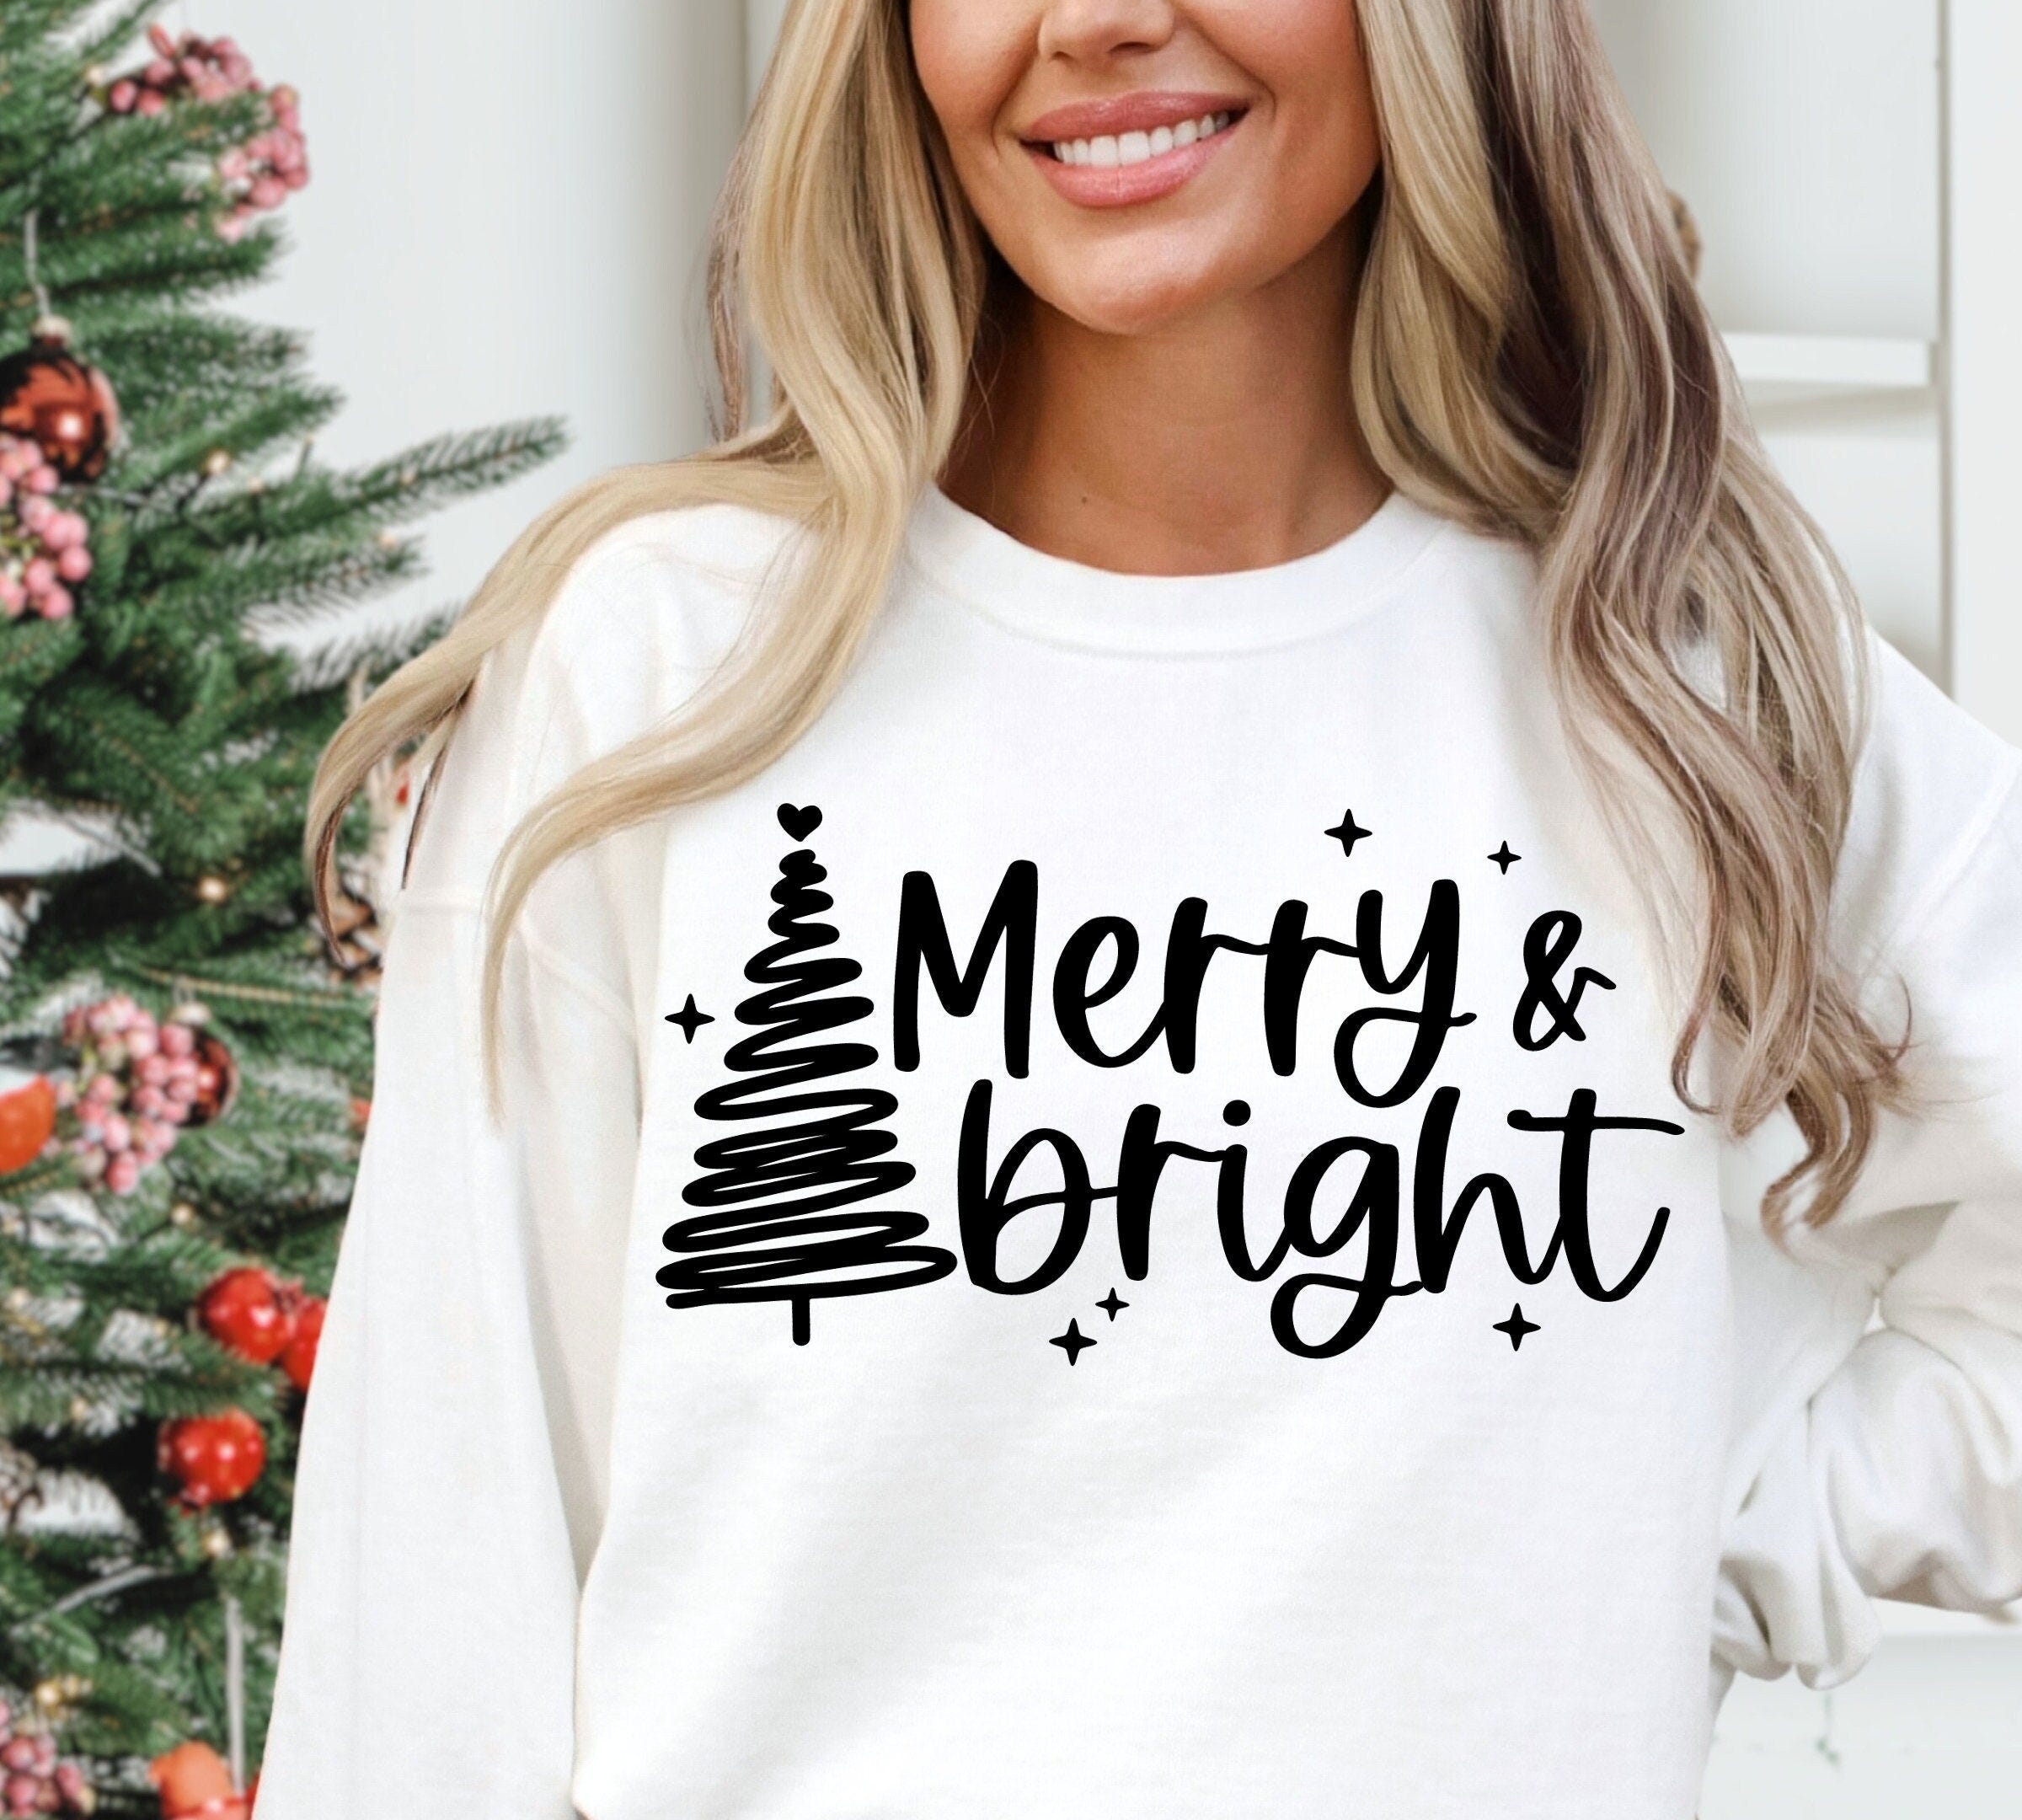 Merry and Bright Svg, Christmas Tree Svg, Christmas Shirt Svg, Christmas Saying, Merry Christmas, Winter Holiday Gift, Cricut File, Png